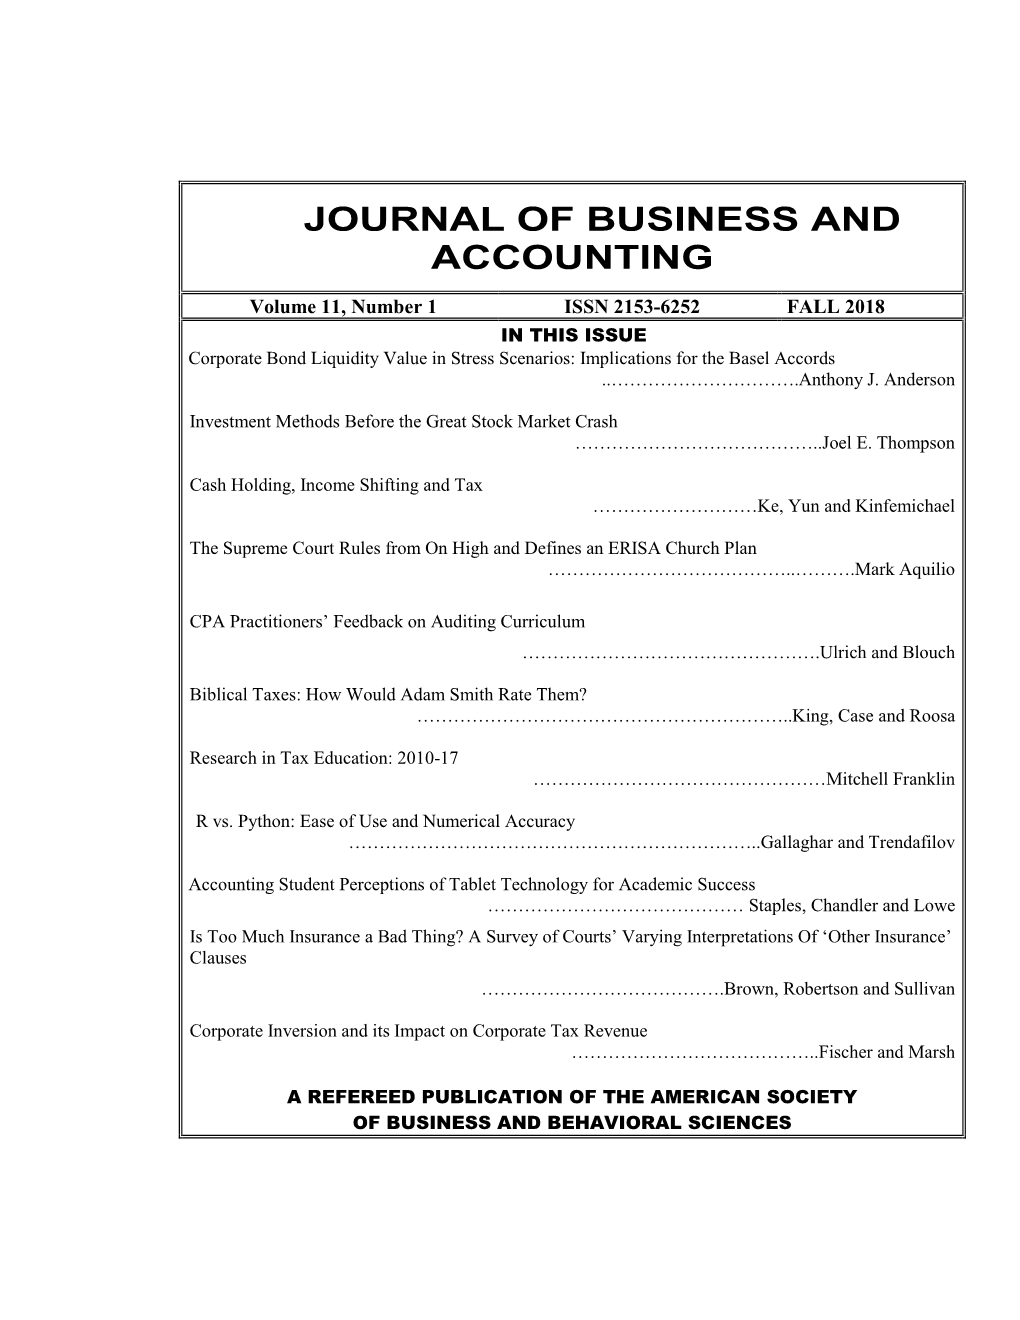 Journal of Business and Accounting